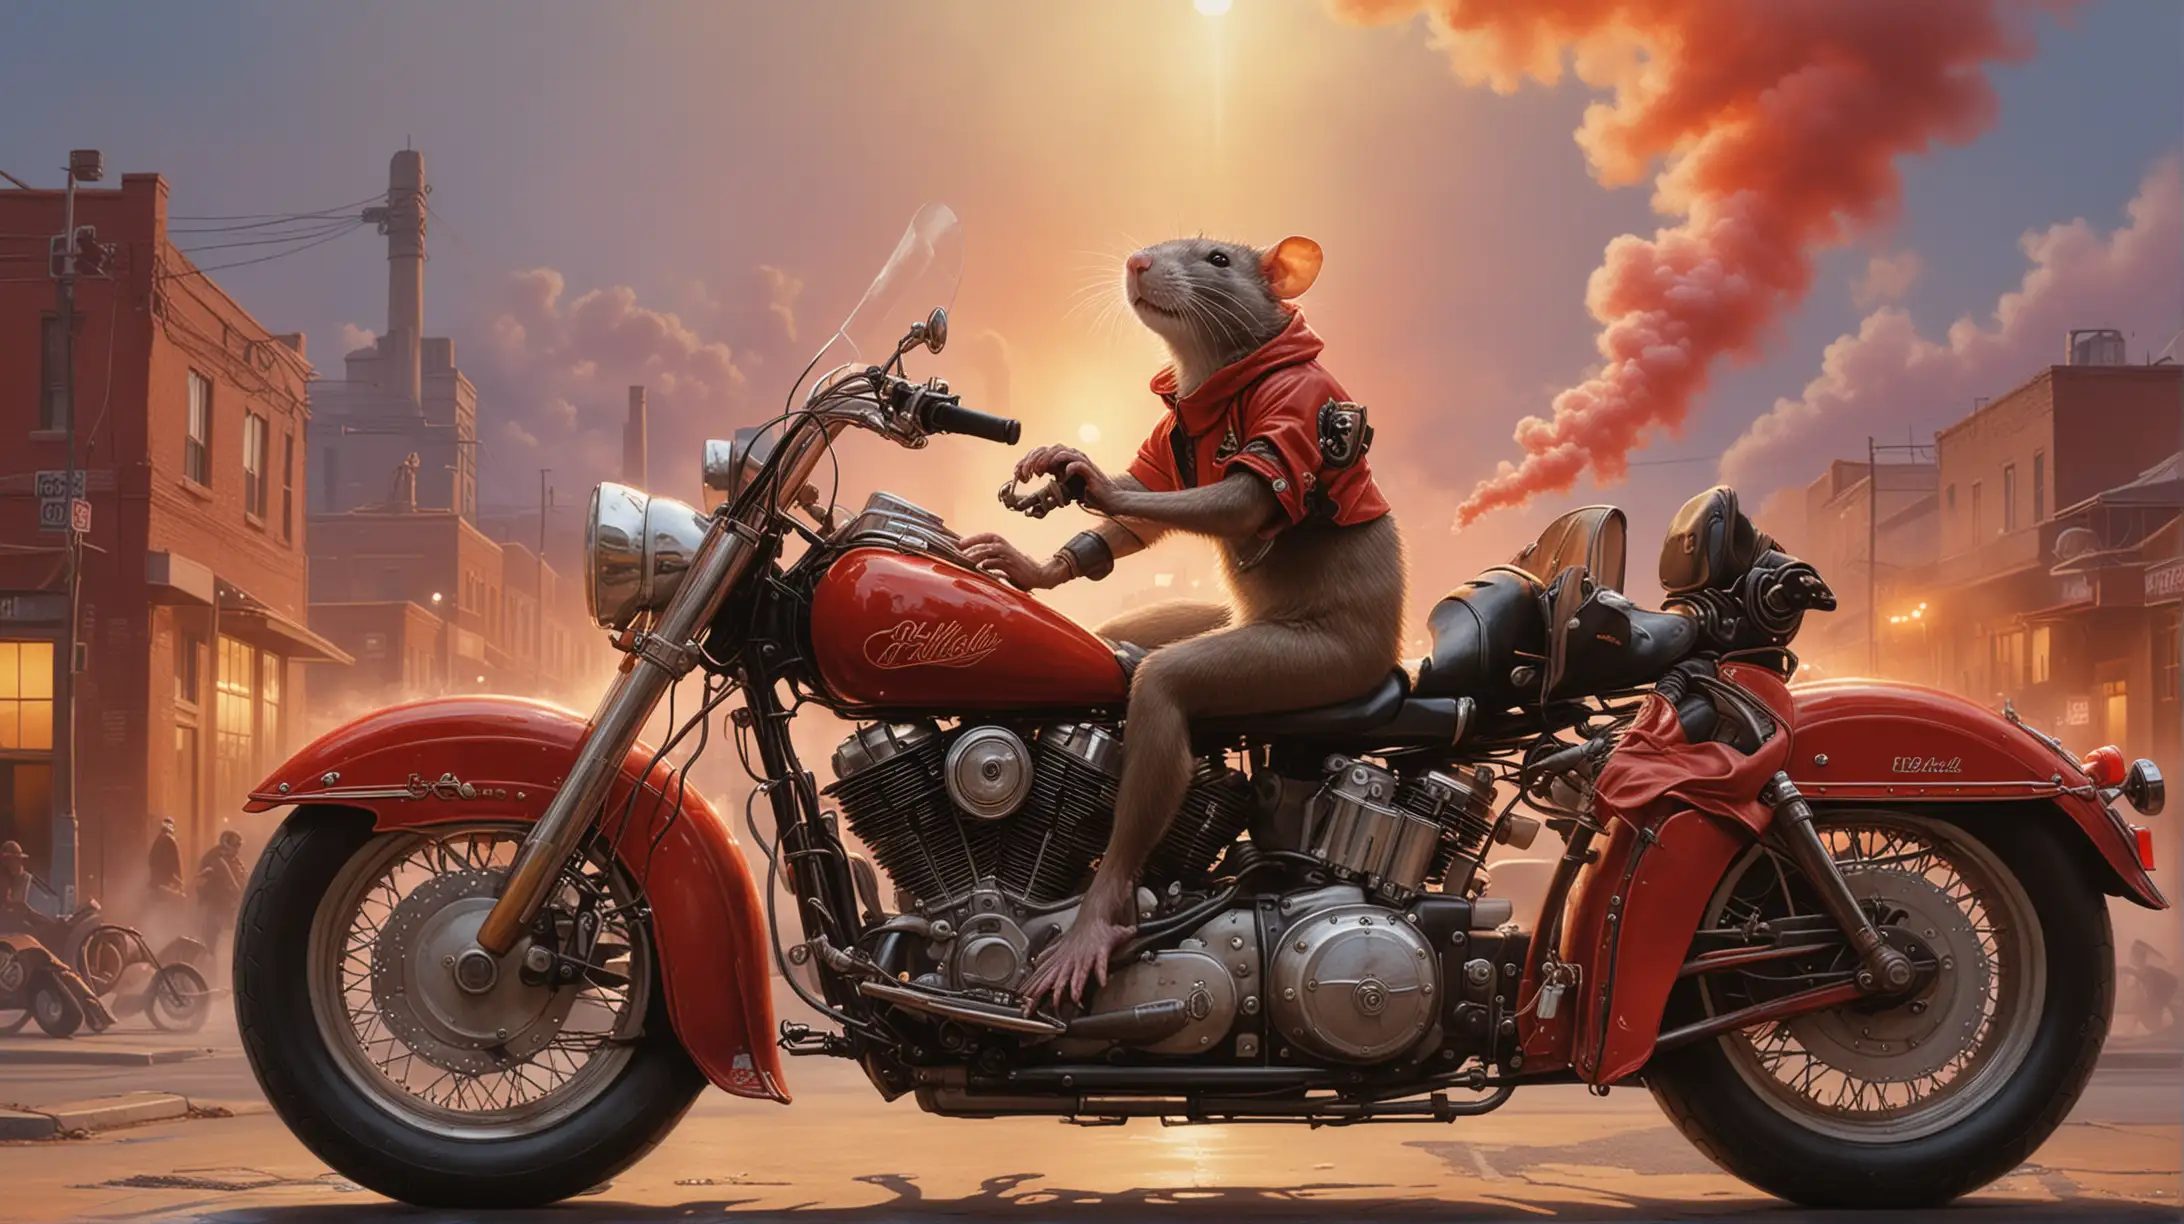 Realistic Rat on Harley Electra Motorcycle with Red Mist Industrial City Scene